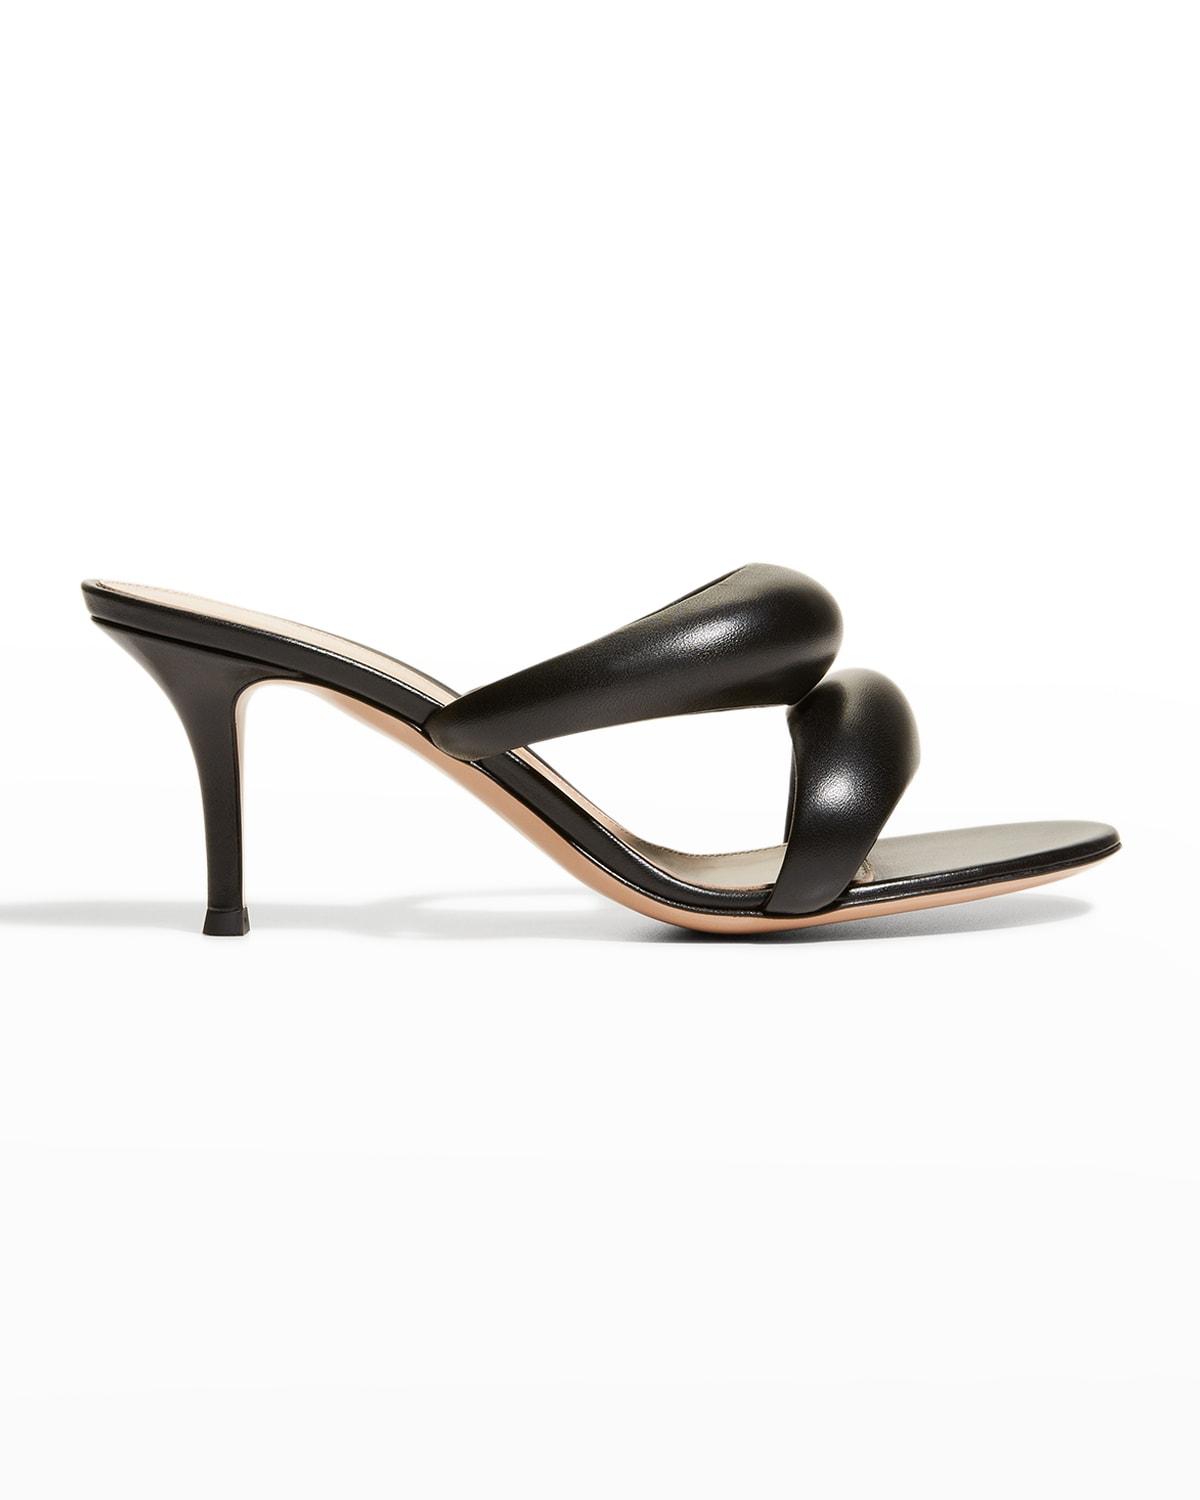 Gianvito Rossi Bijoux Puffy Napa Dual-band Slide Sandals in Black | Lyst